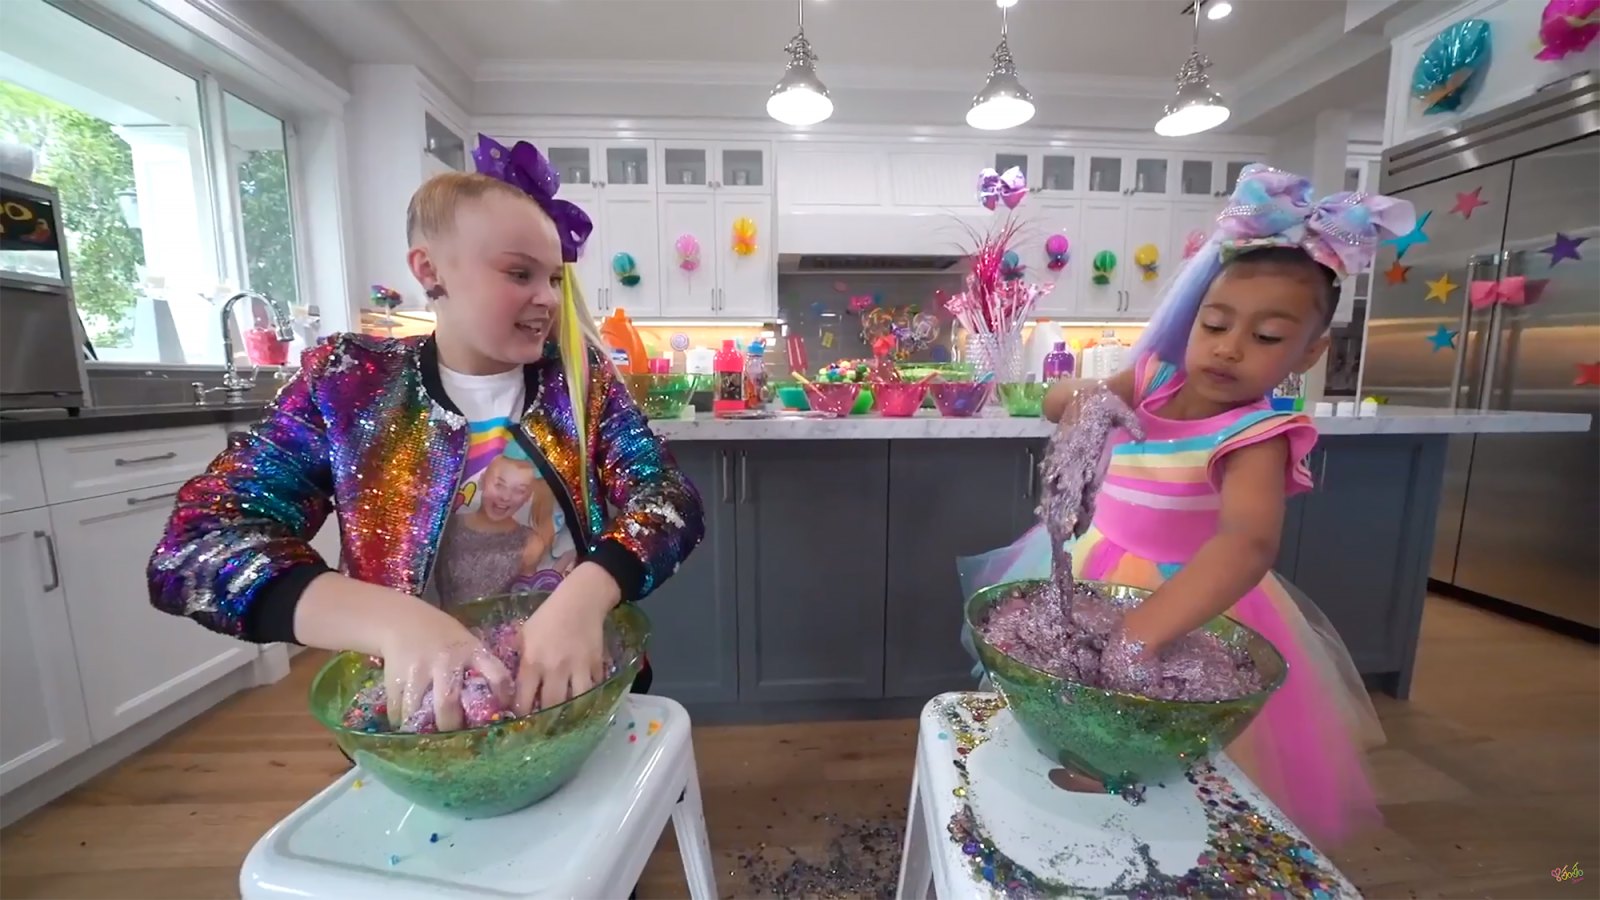 Kim Kardashian and Kanye West’s Daughter North Steals the Show in Epic New JoJo Siwa Video: Watch!